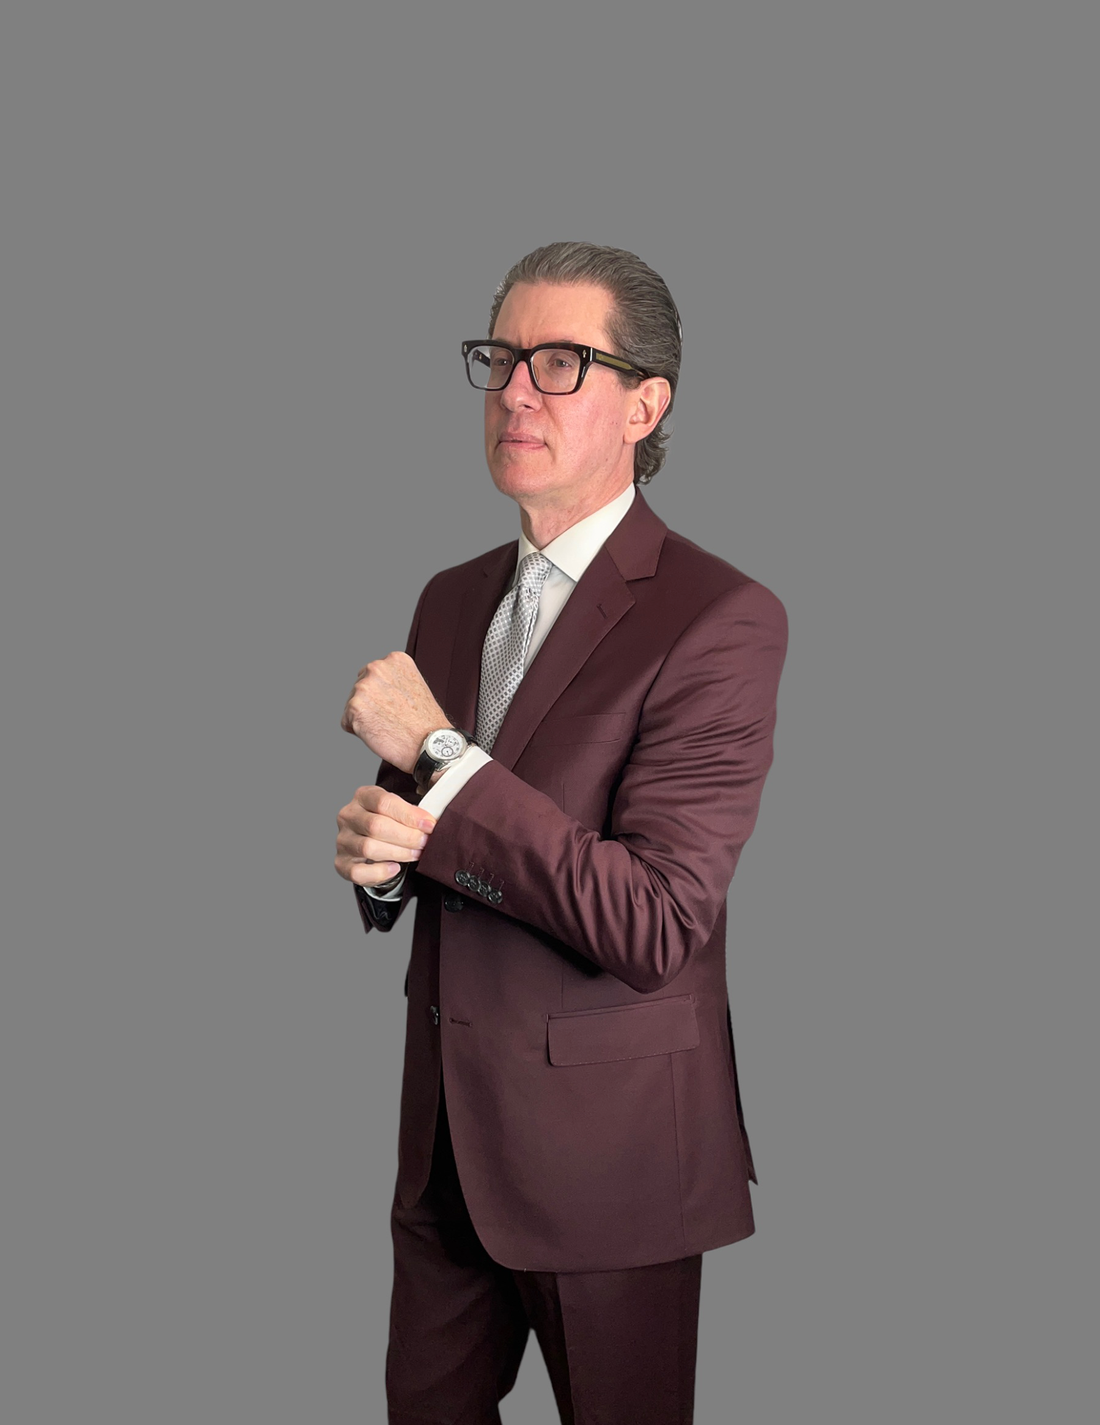 burgundy suit with shirt sleeves showing